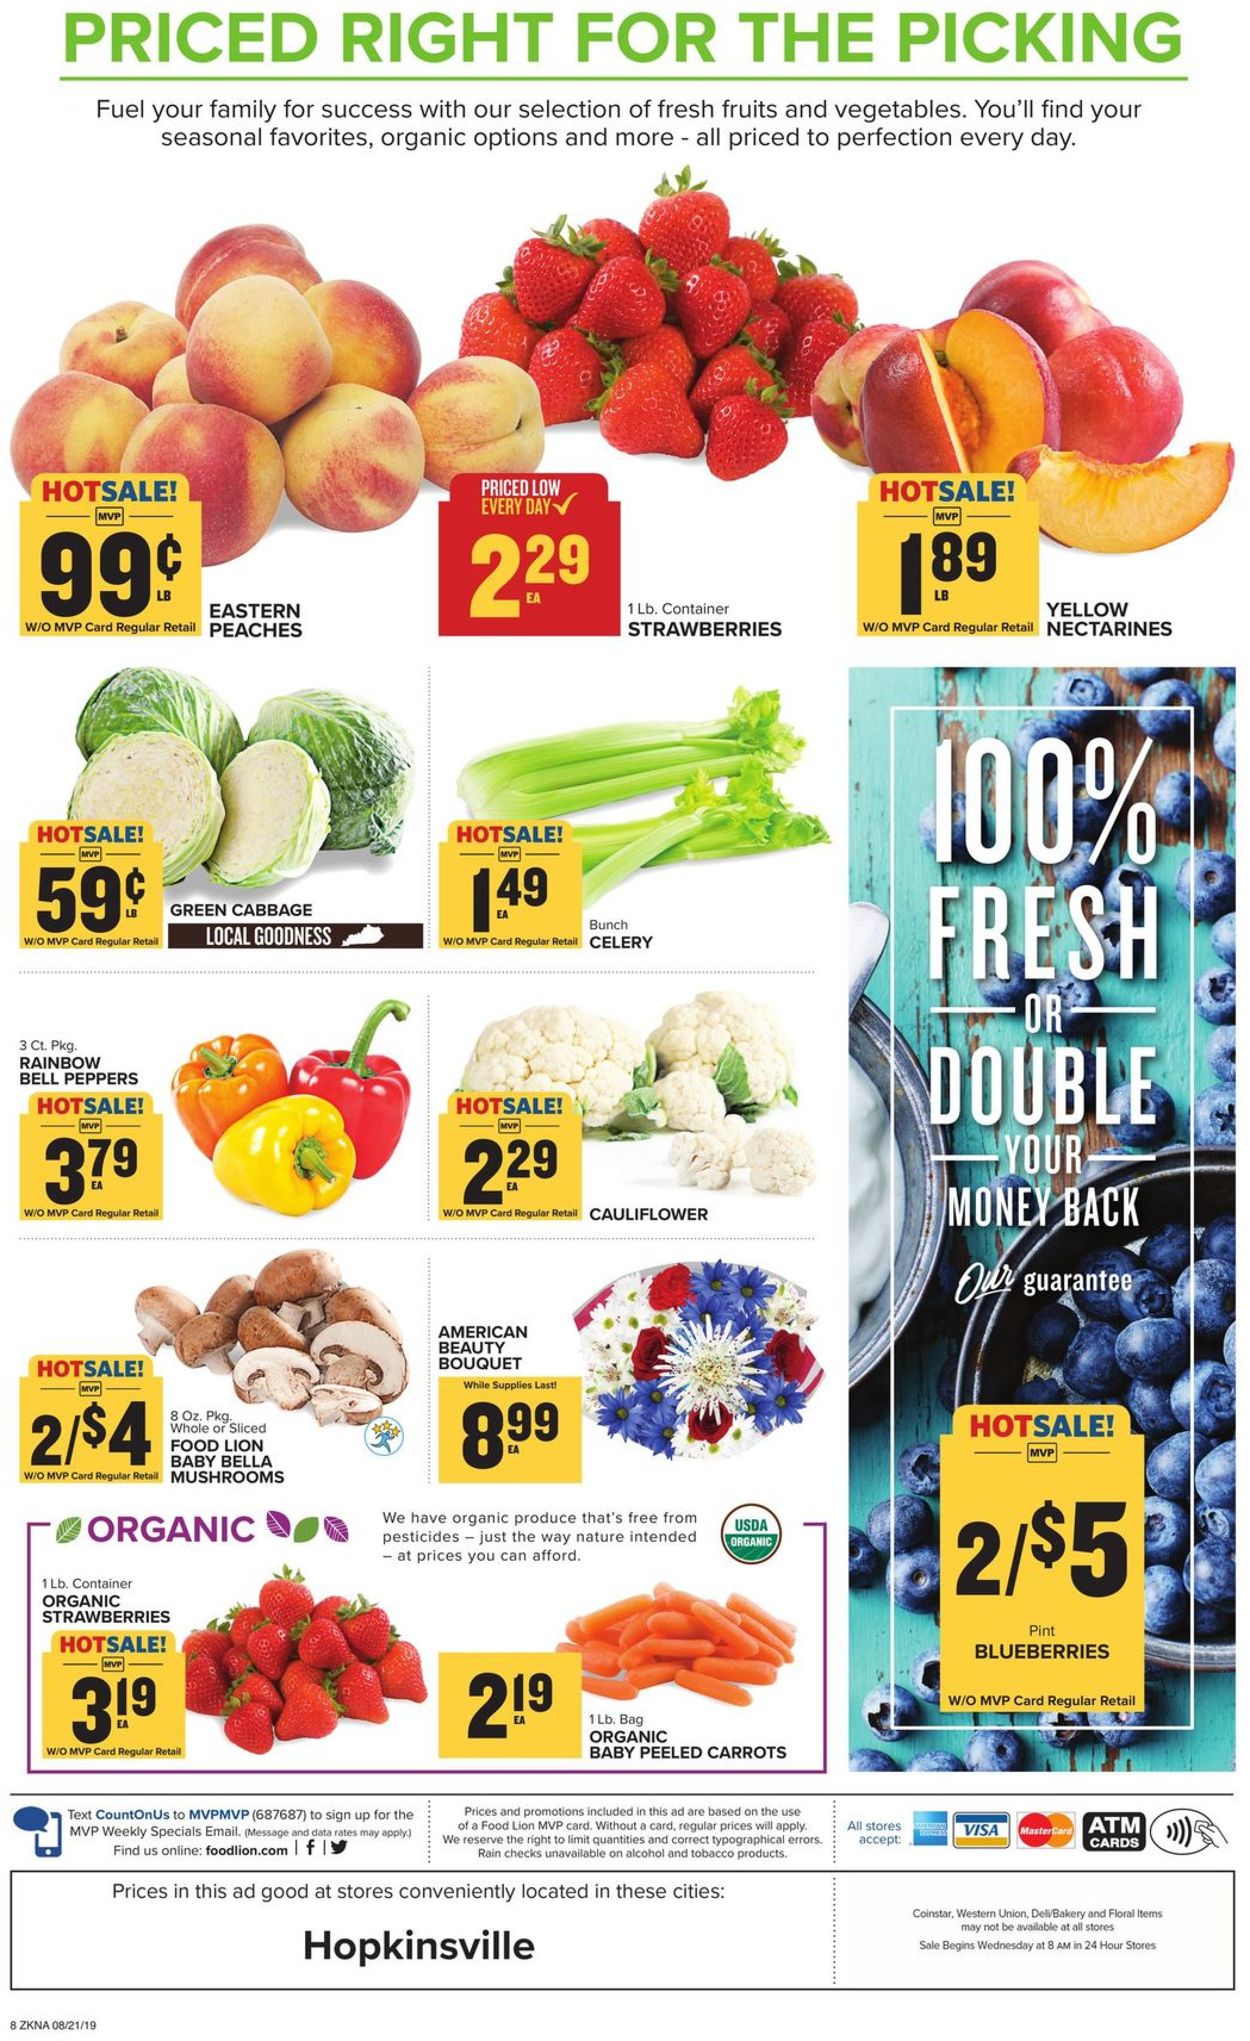 Catalogue Food Lion from 08/21/2019